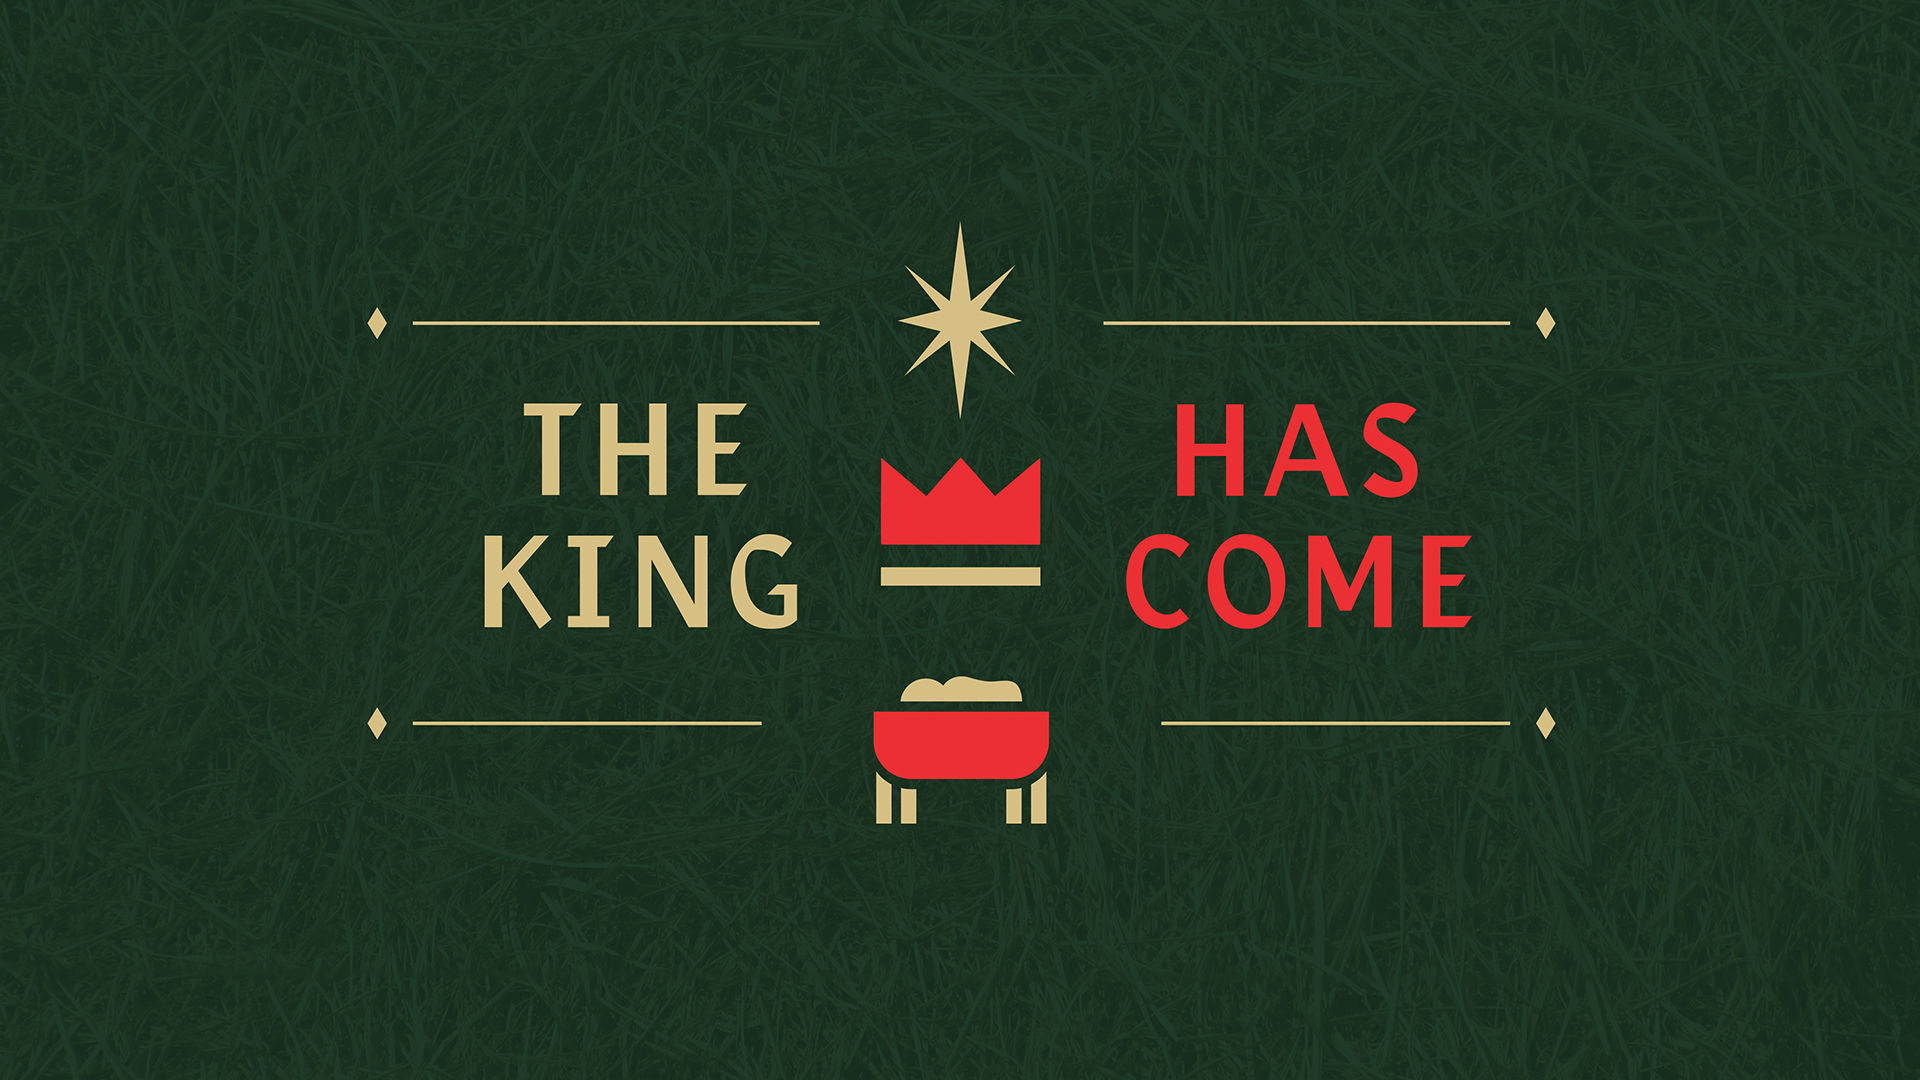 THE KING HAS COME: Promises, Promises, Promises